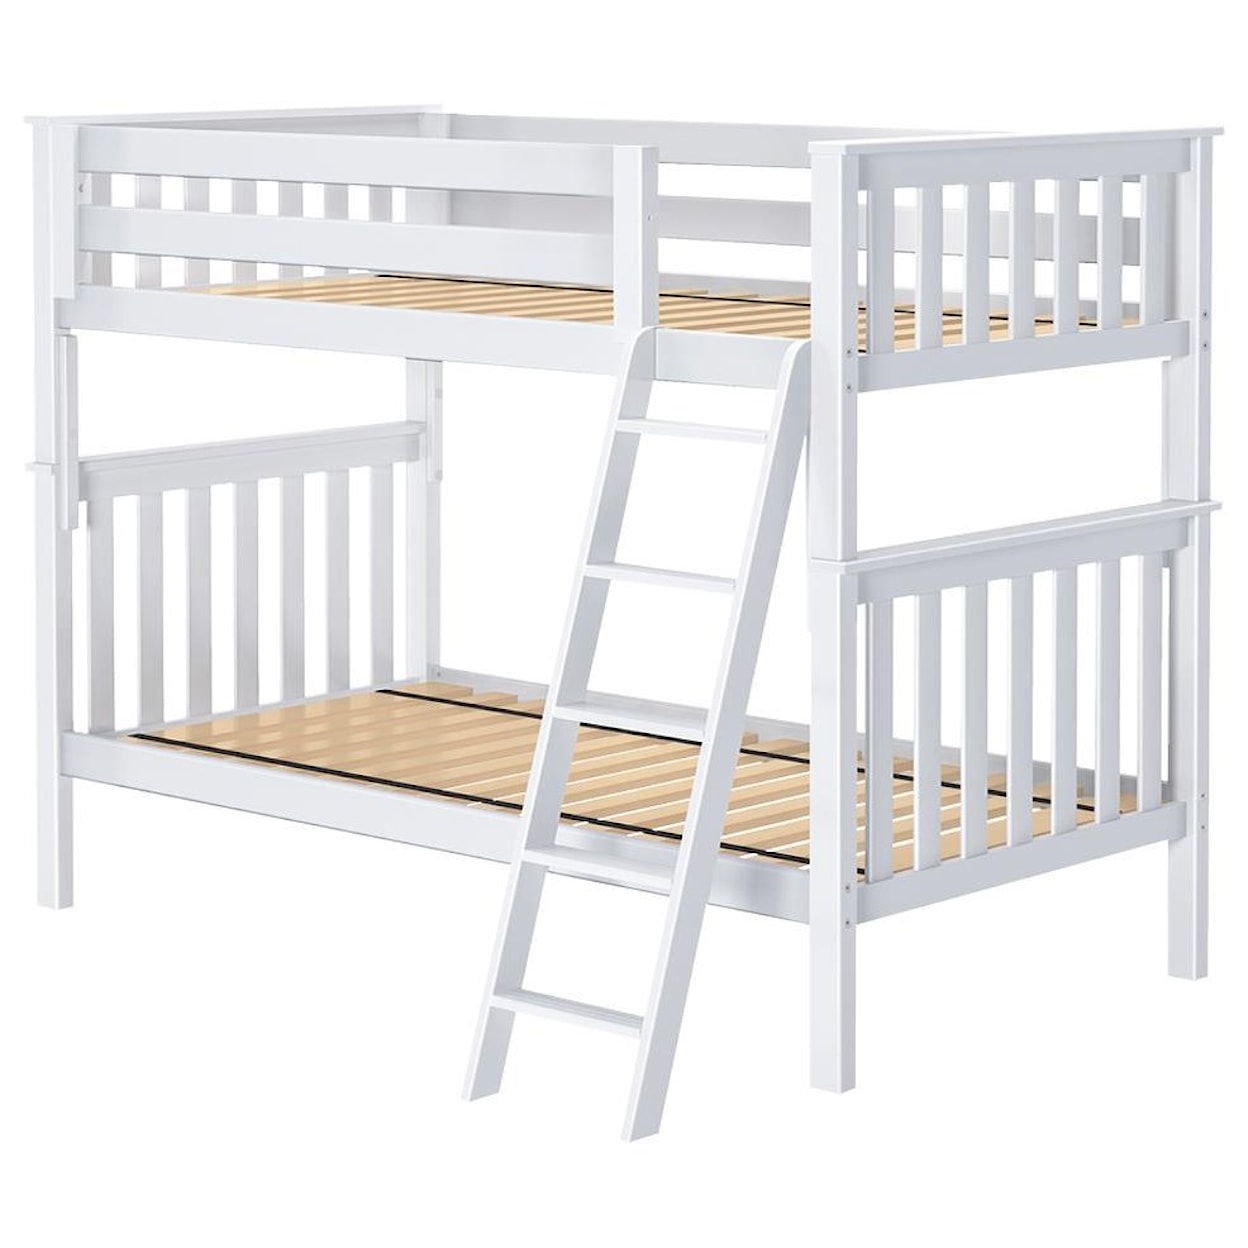 Jackpot Kids Bunk Beds Bristol 1 Twin/Twin Bunk Bed in White